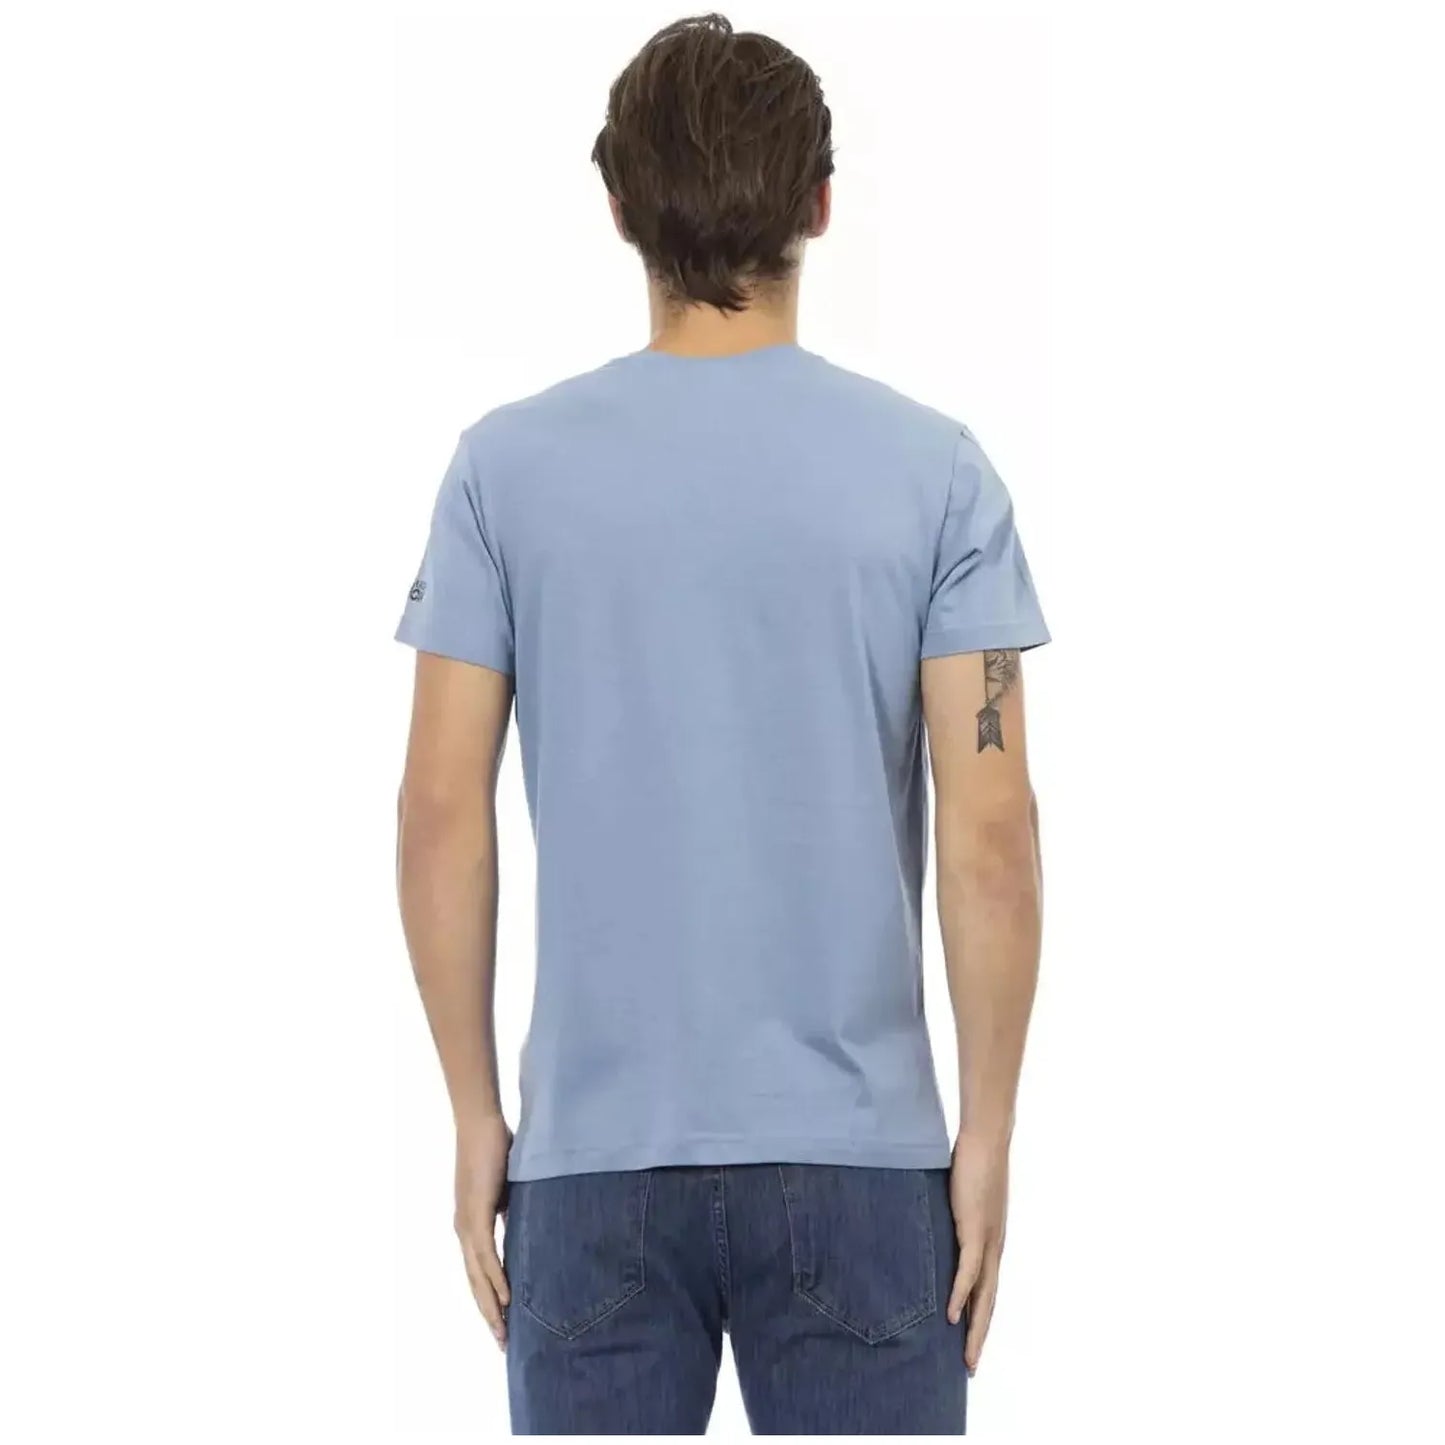 Trussardi Action Chic Light Blue V-Neck Tee with Front Print light-blue-cotton-t-shirt-7